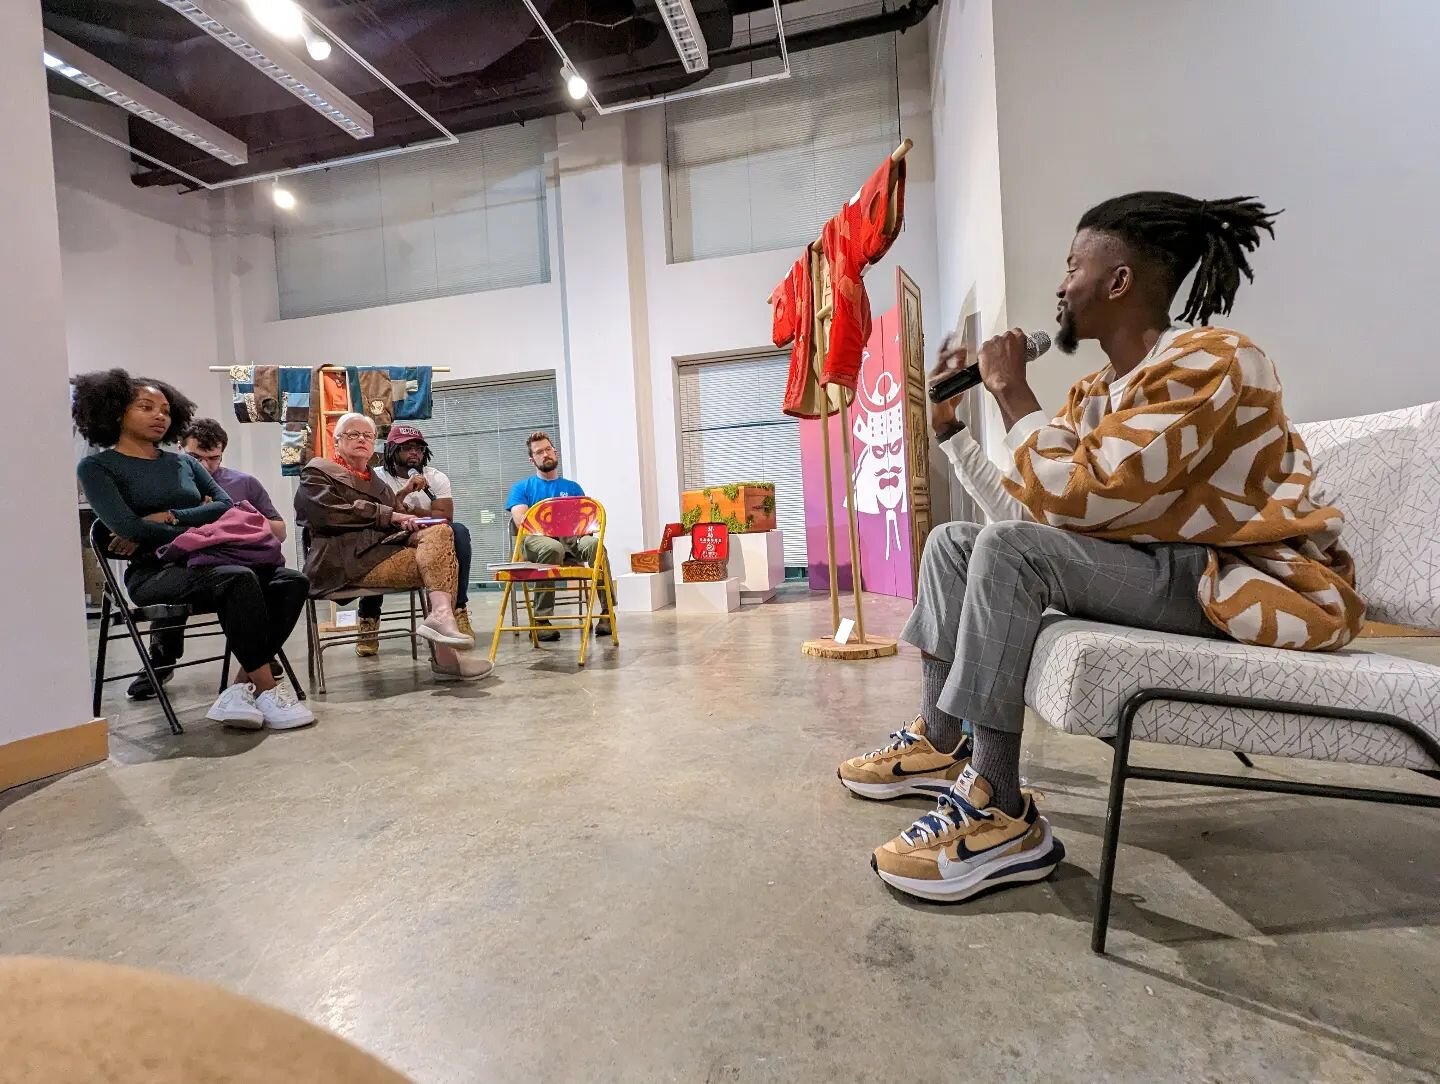 Last night's artist talk was phenomenal. Had a blast chatting with @madeby_don on his work making fashion wear from upcycled clothing and contributing to sustainability efforts in the fashion industry. I'm still processing as I think there is always 